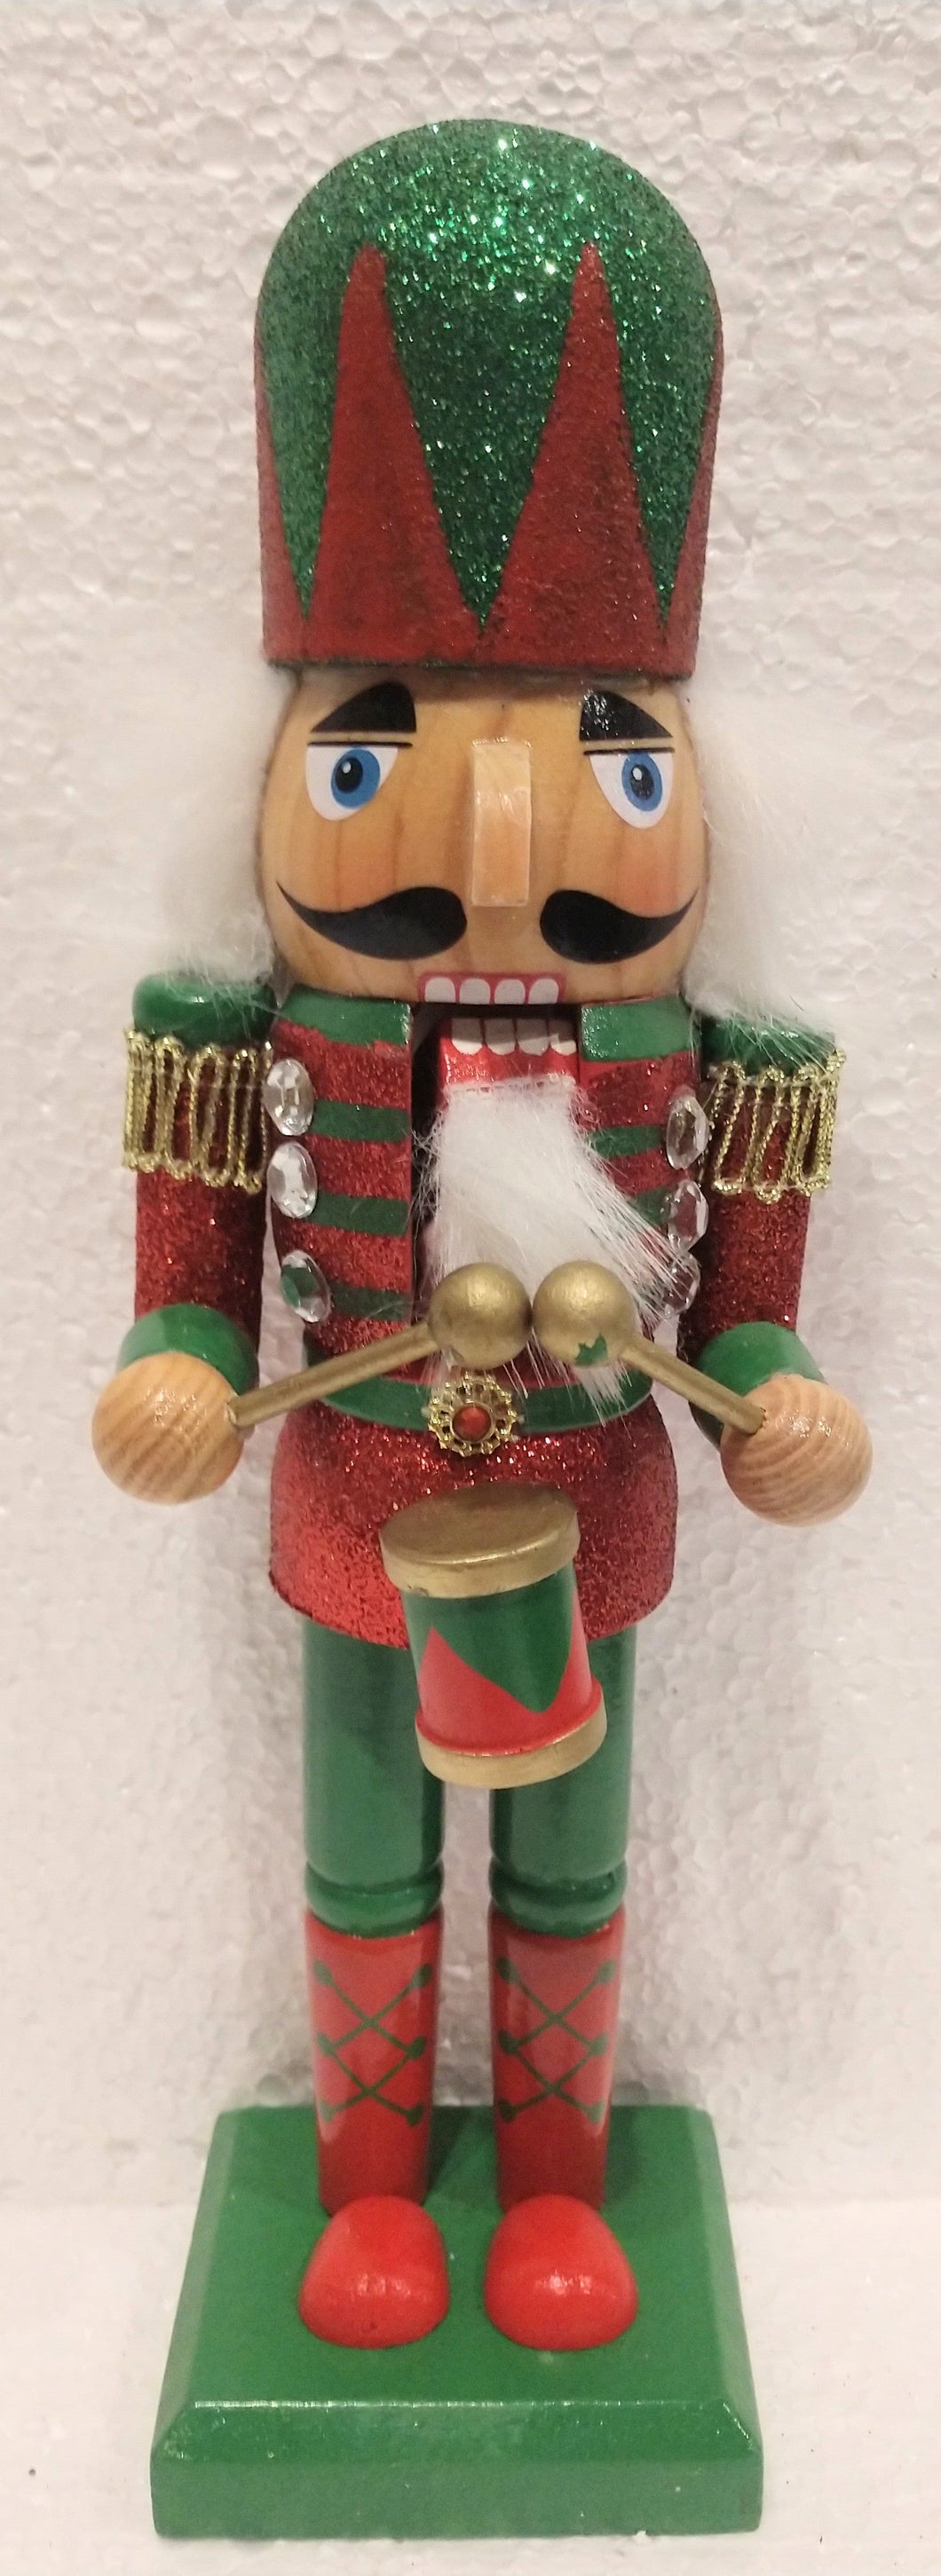 Green/Red nutcracker with drum 10